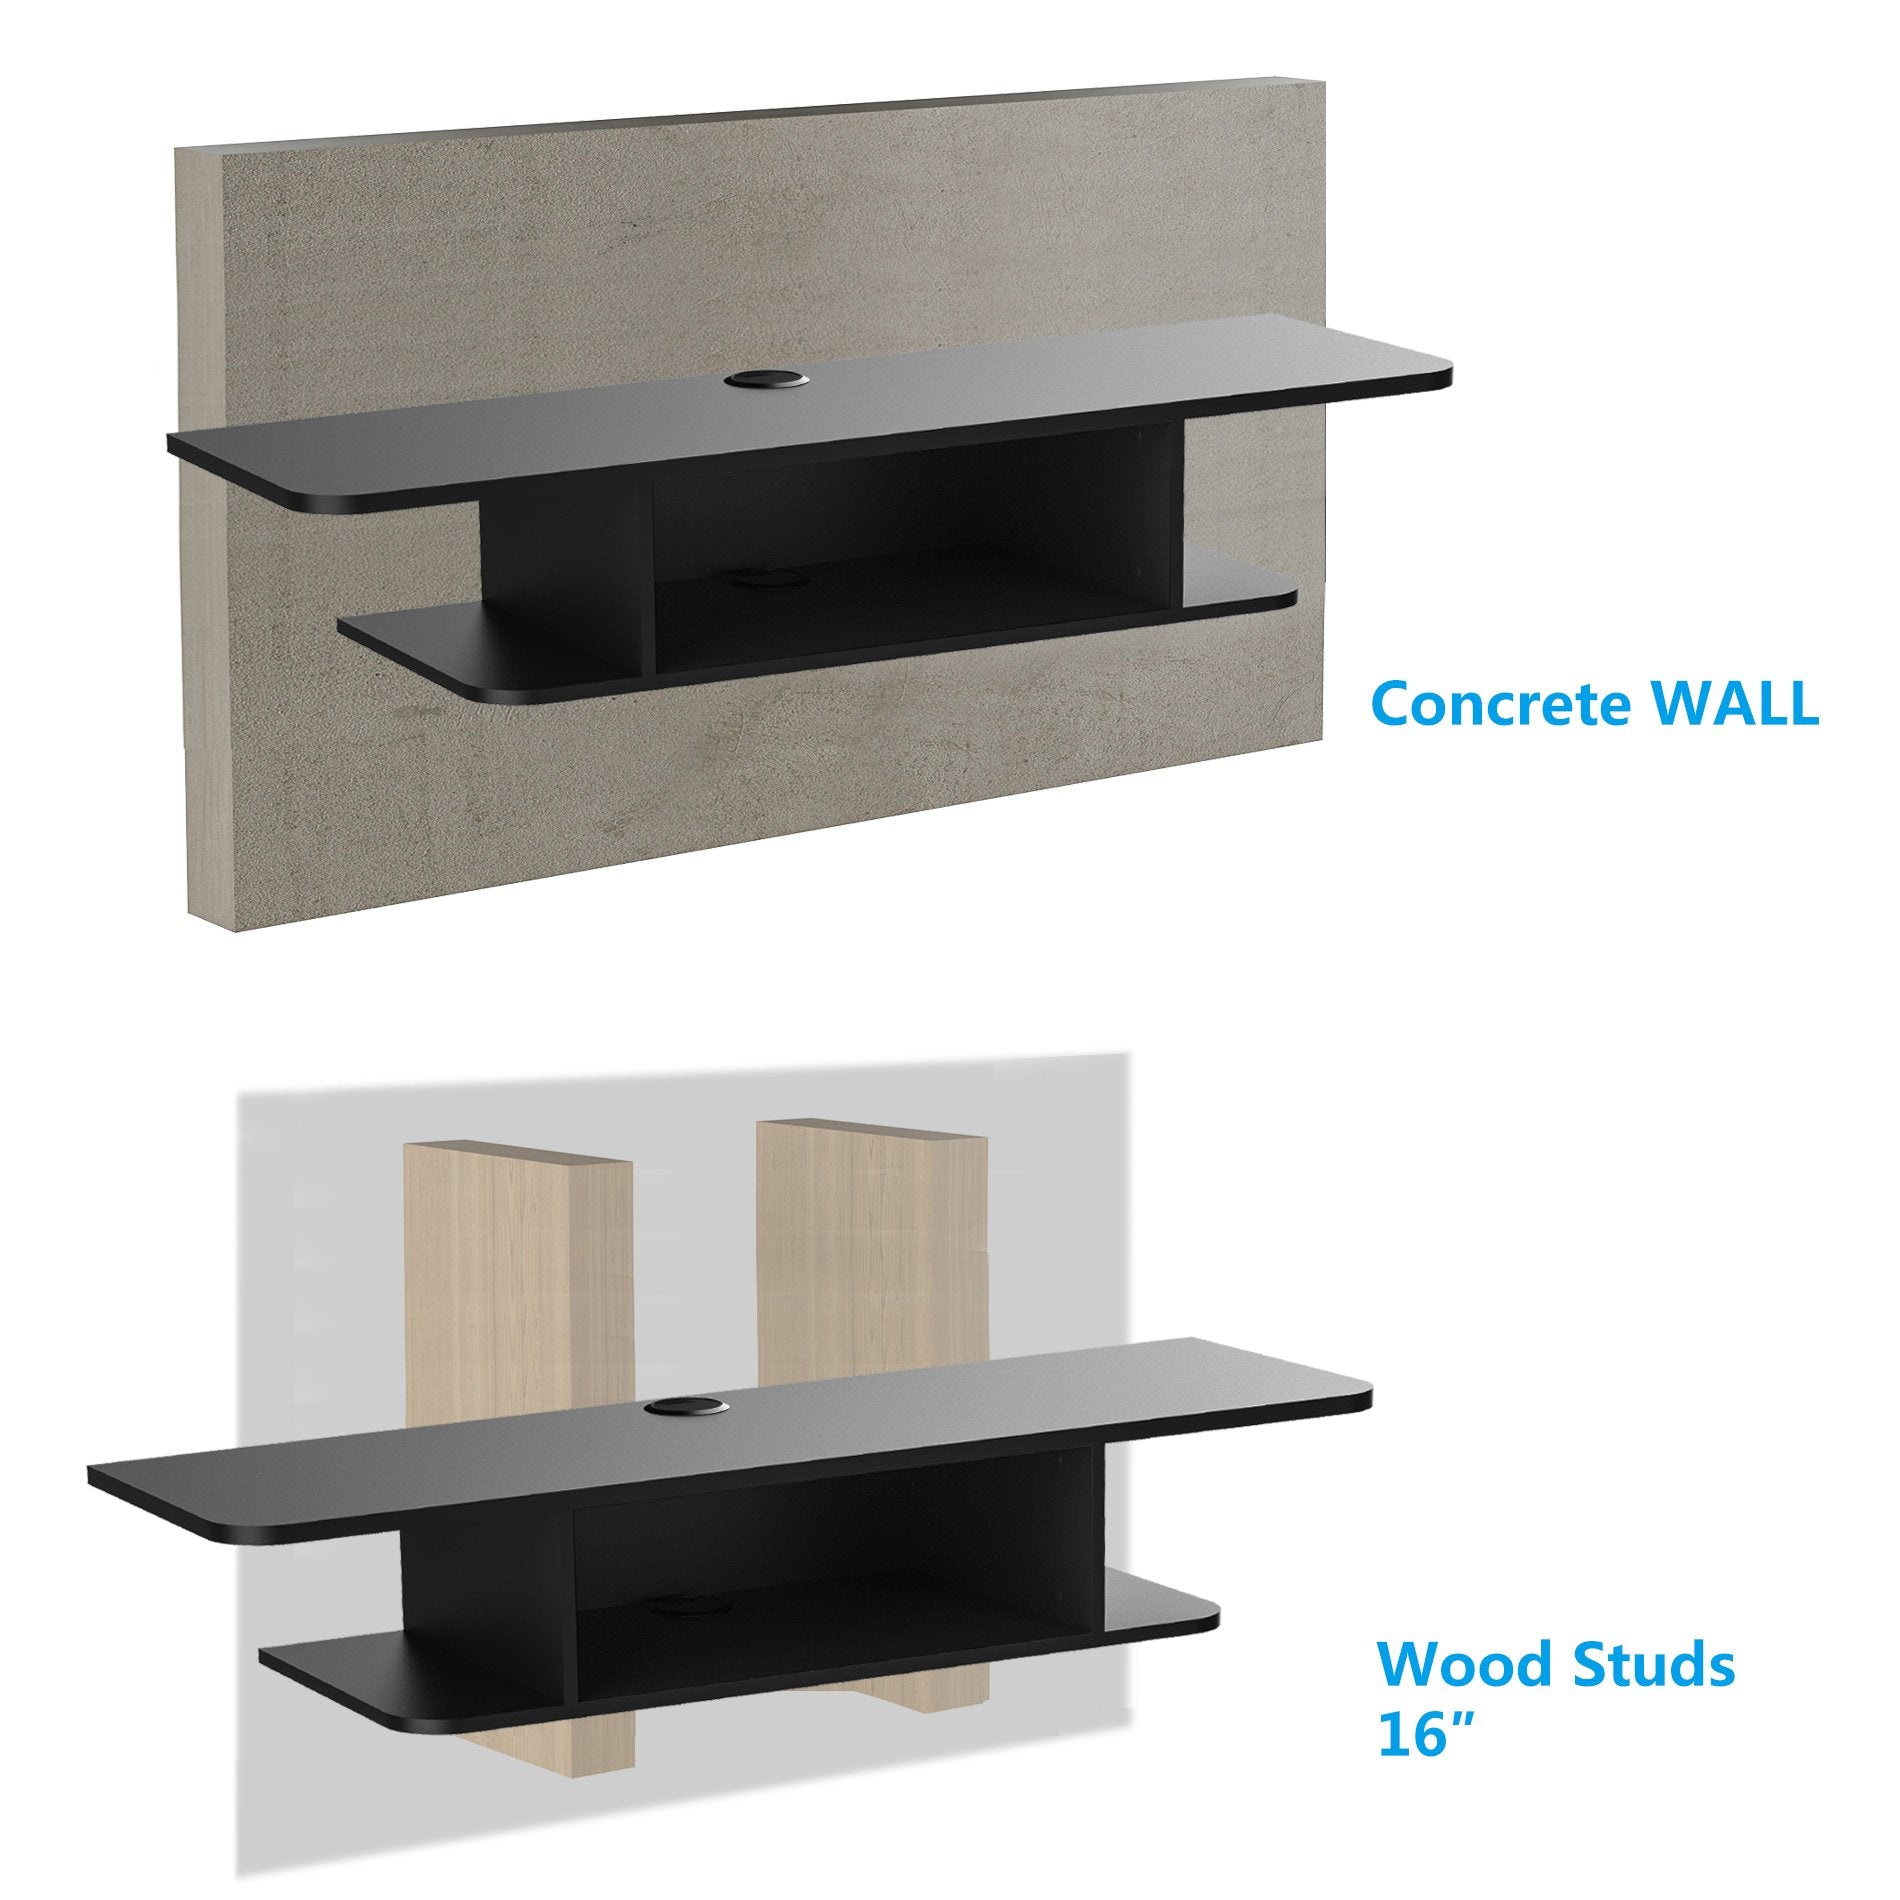 Floating TV Stand Component Shelf 43 inch - FITUEYES-CA